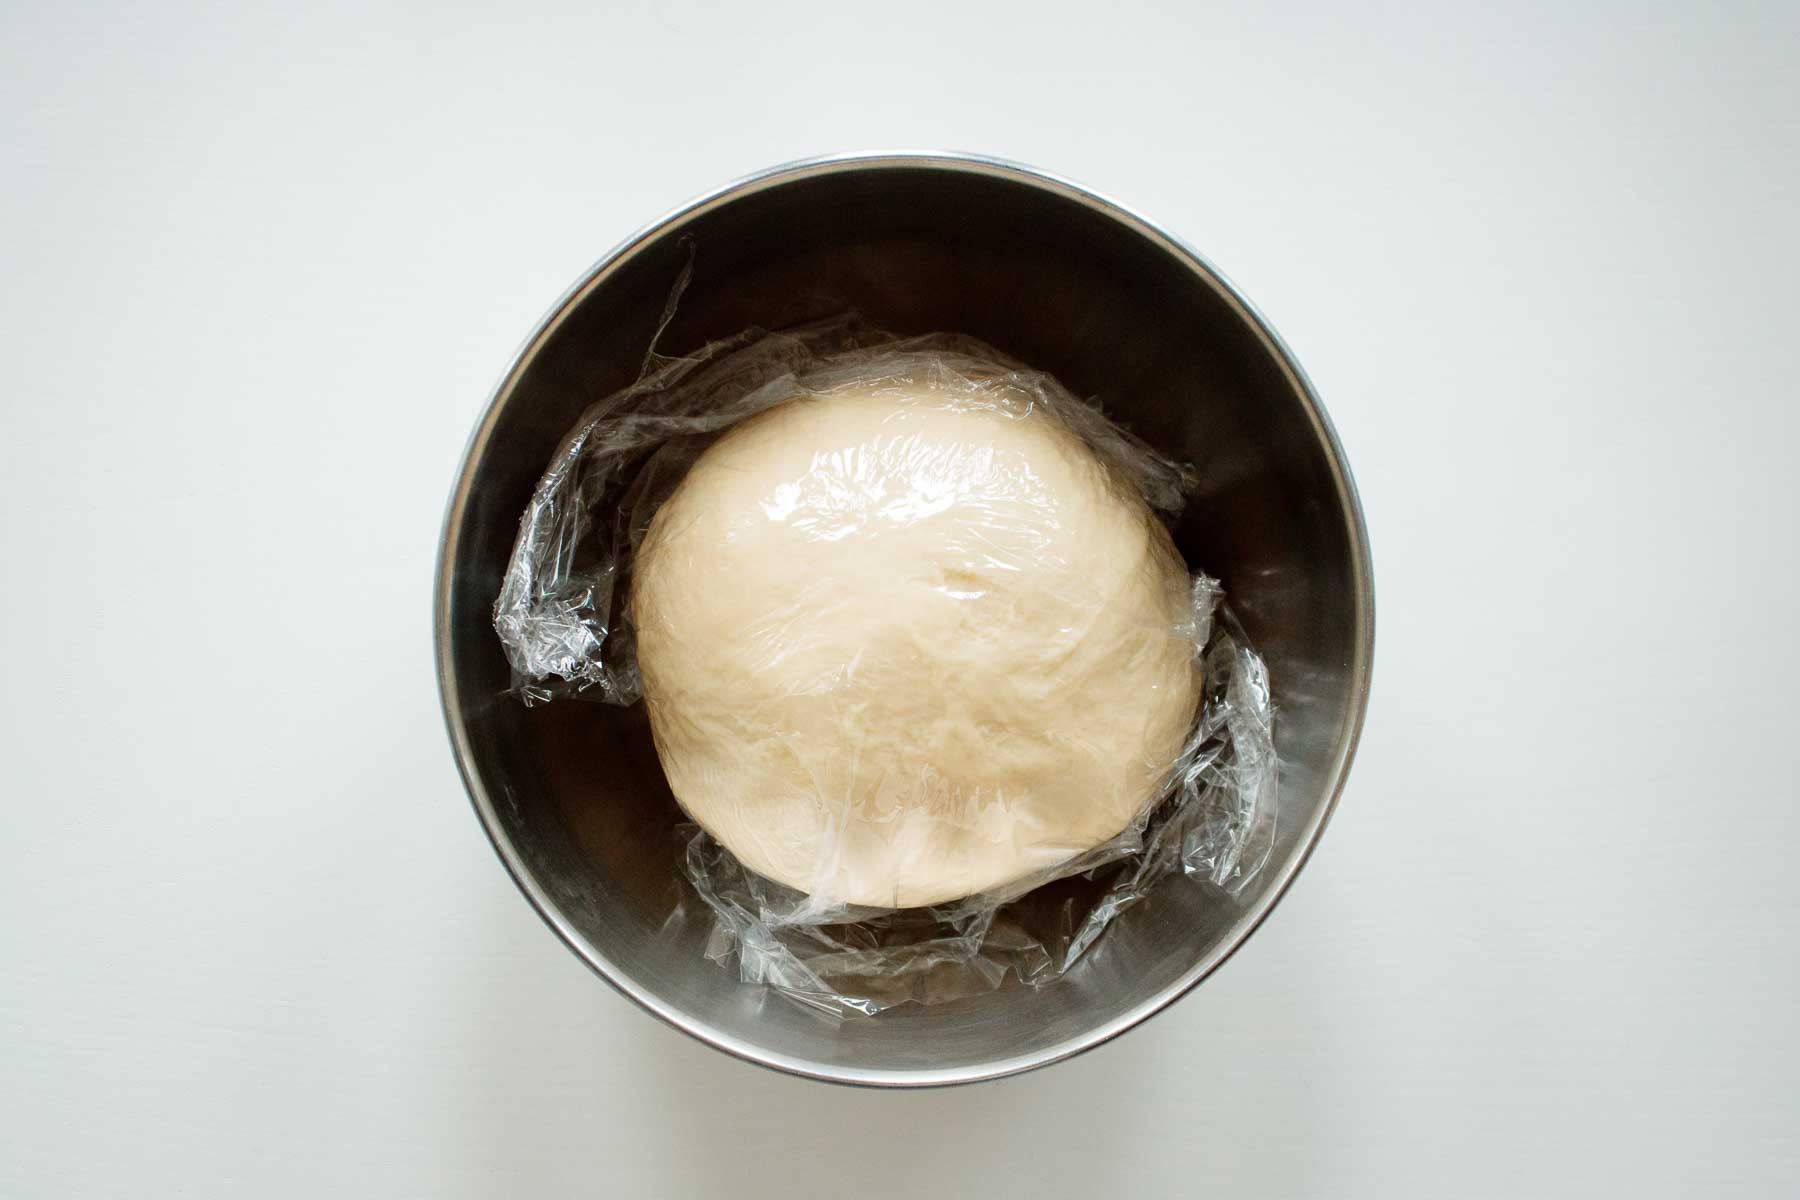 Covered dough, start of the first rise